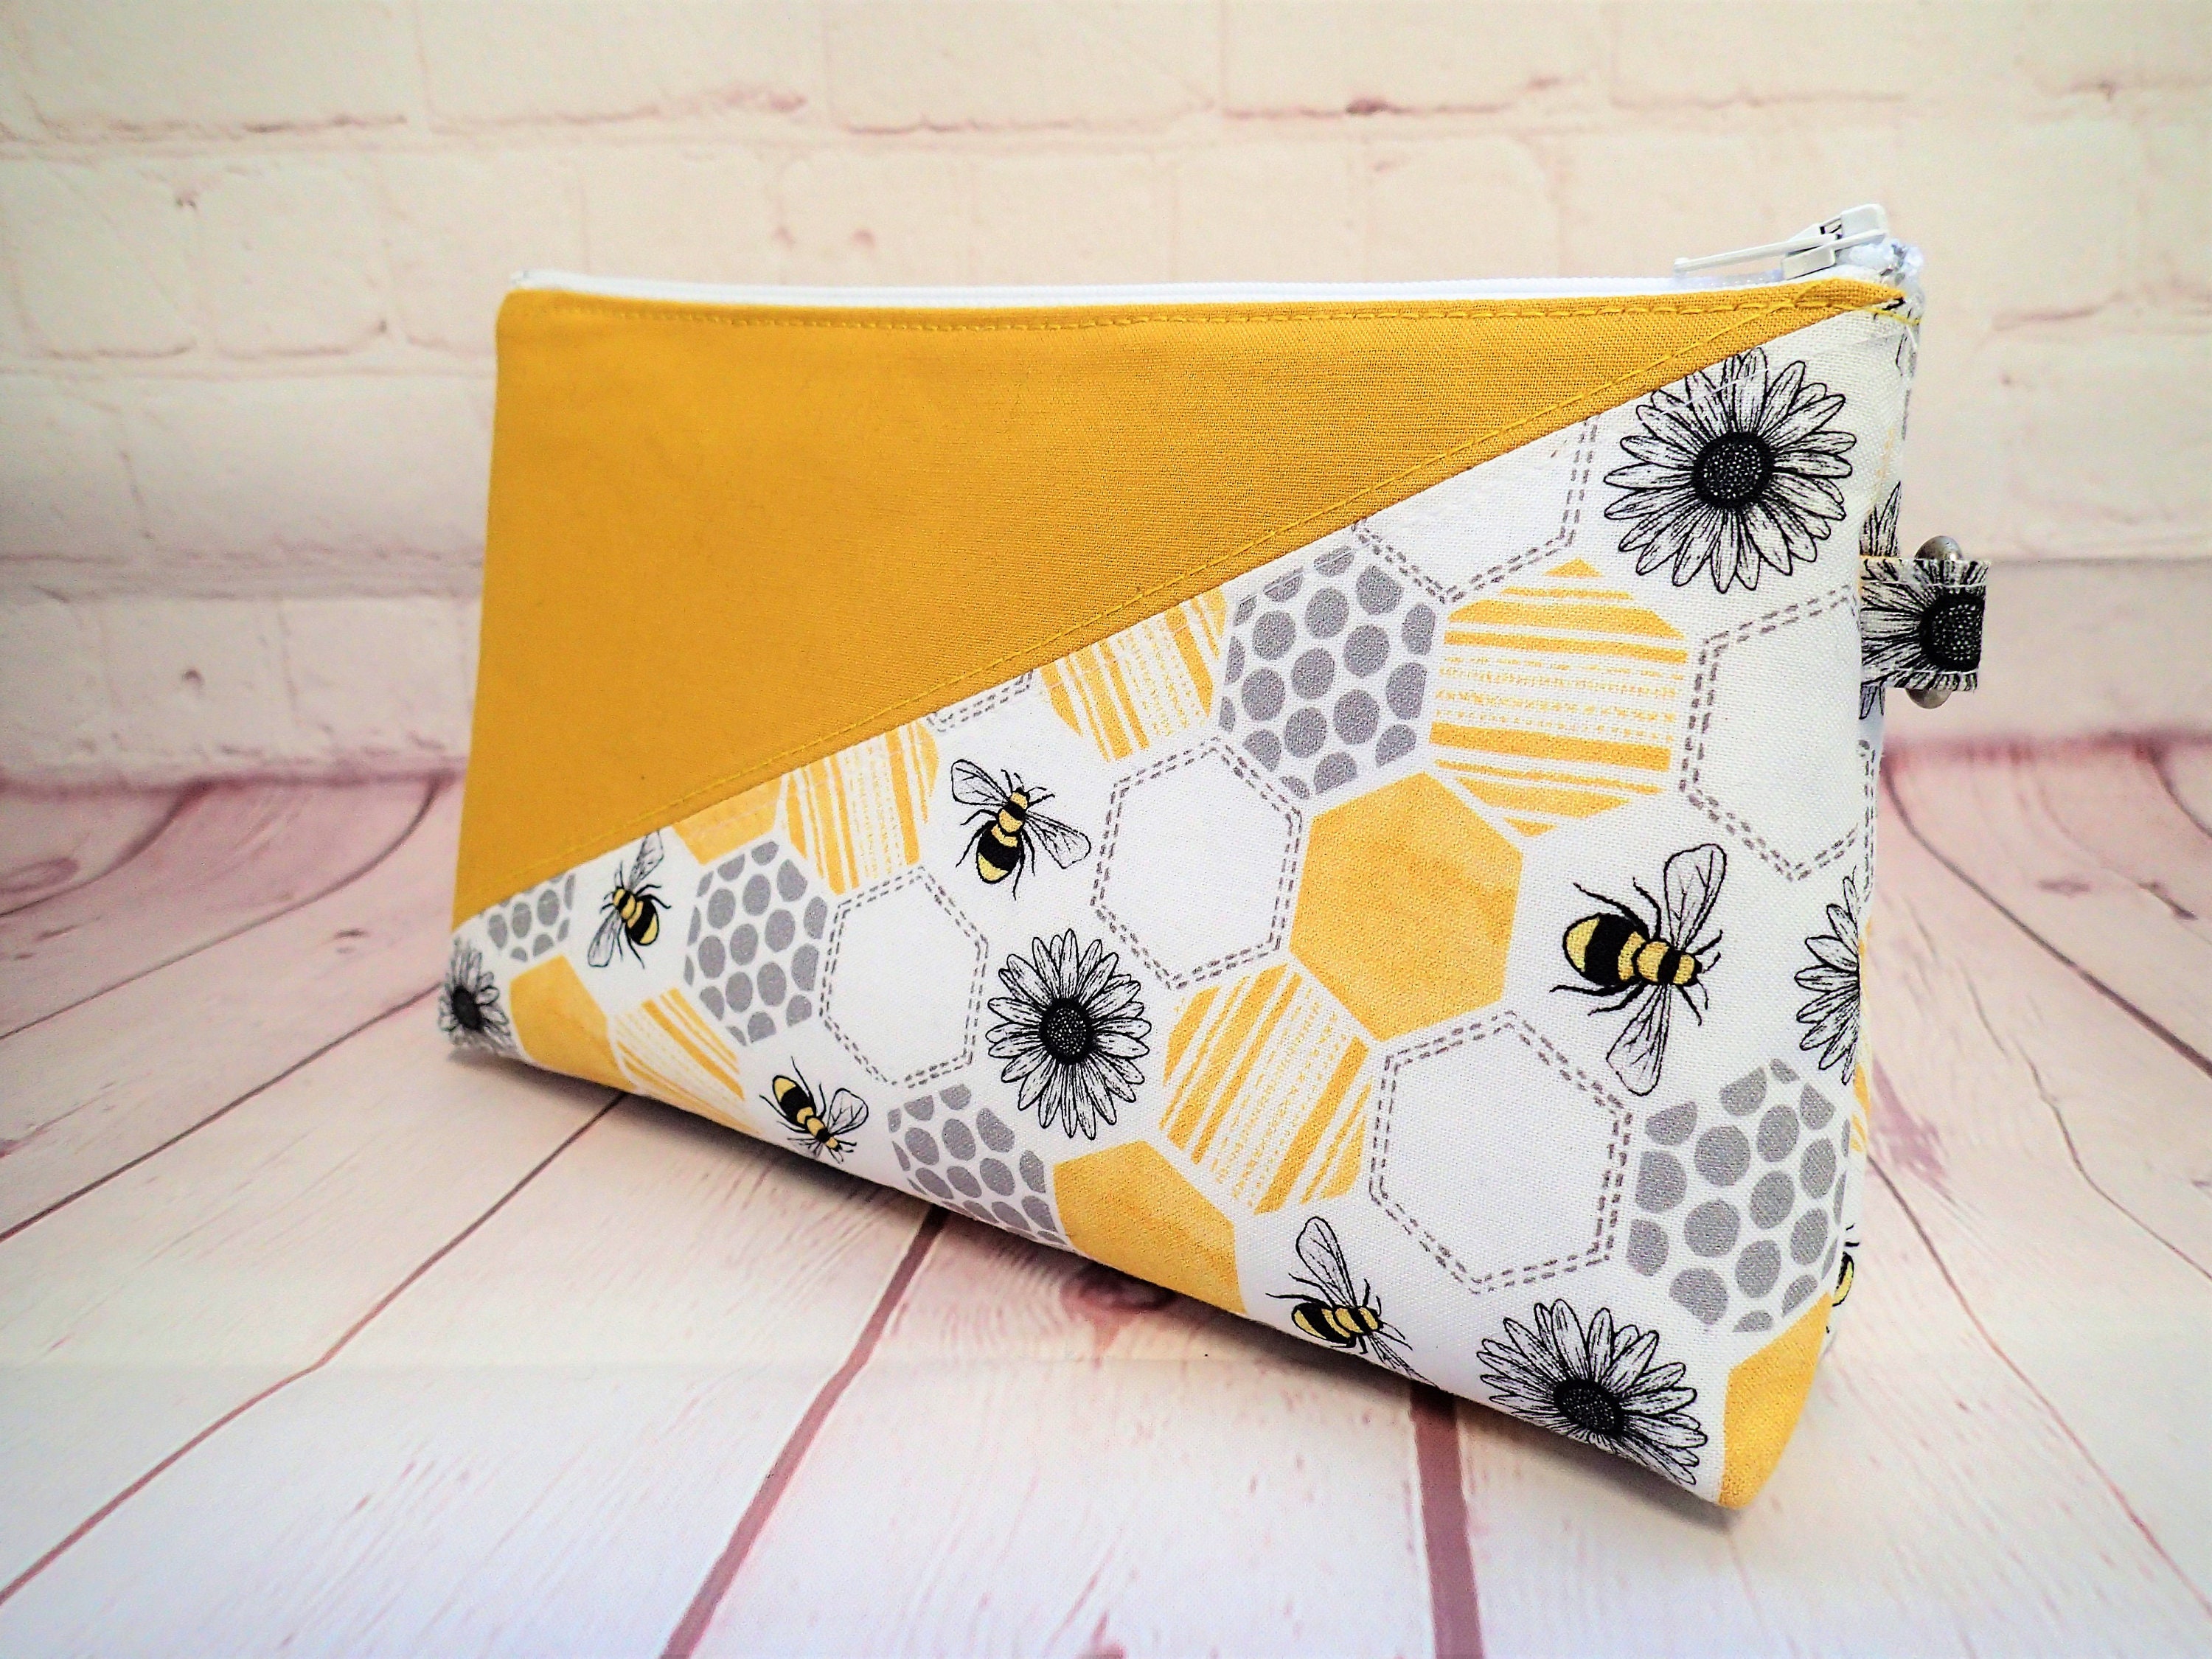 Kent Clutch Bag sewing pattern, custom pockets and video – Sew Simple Bags